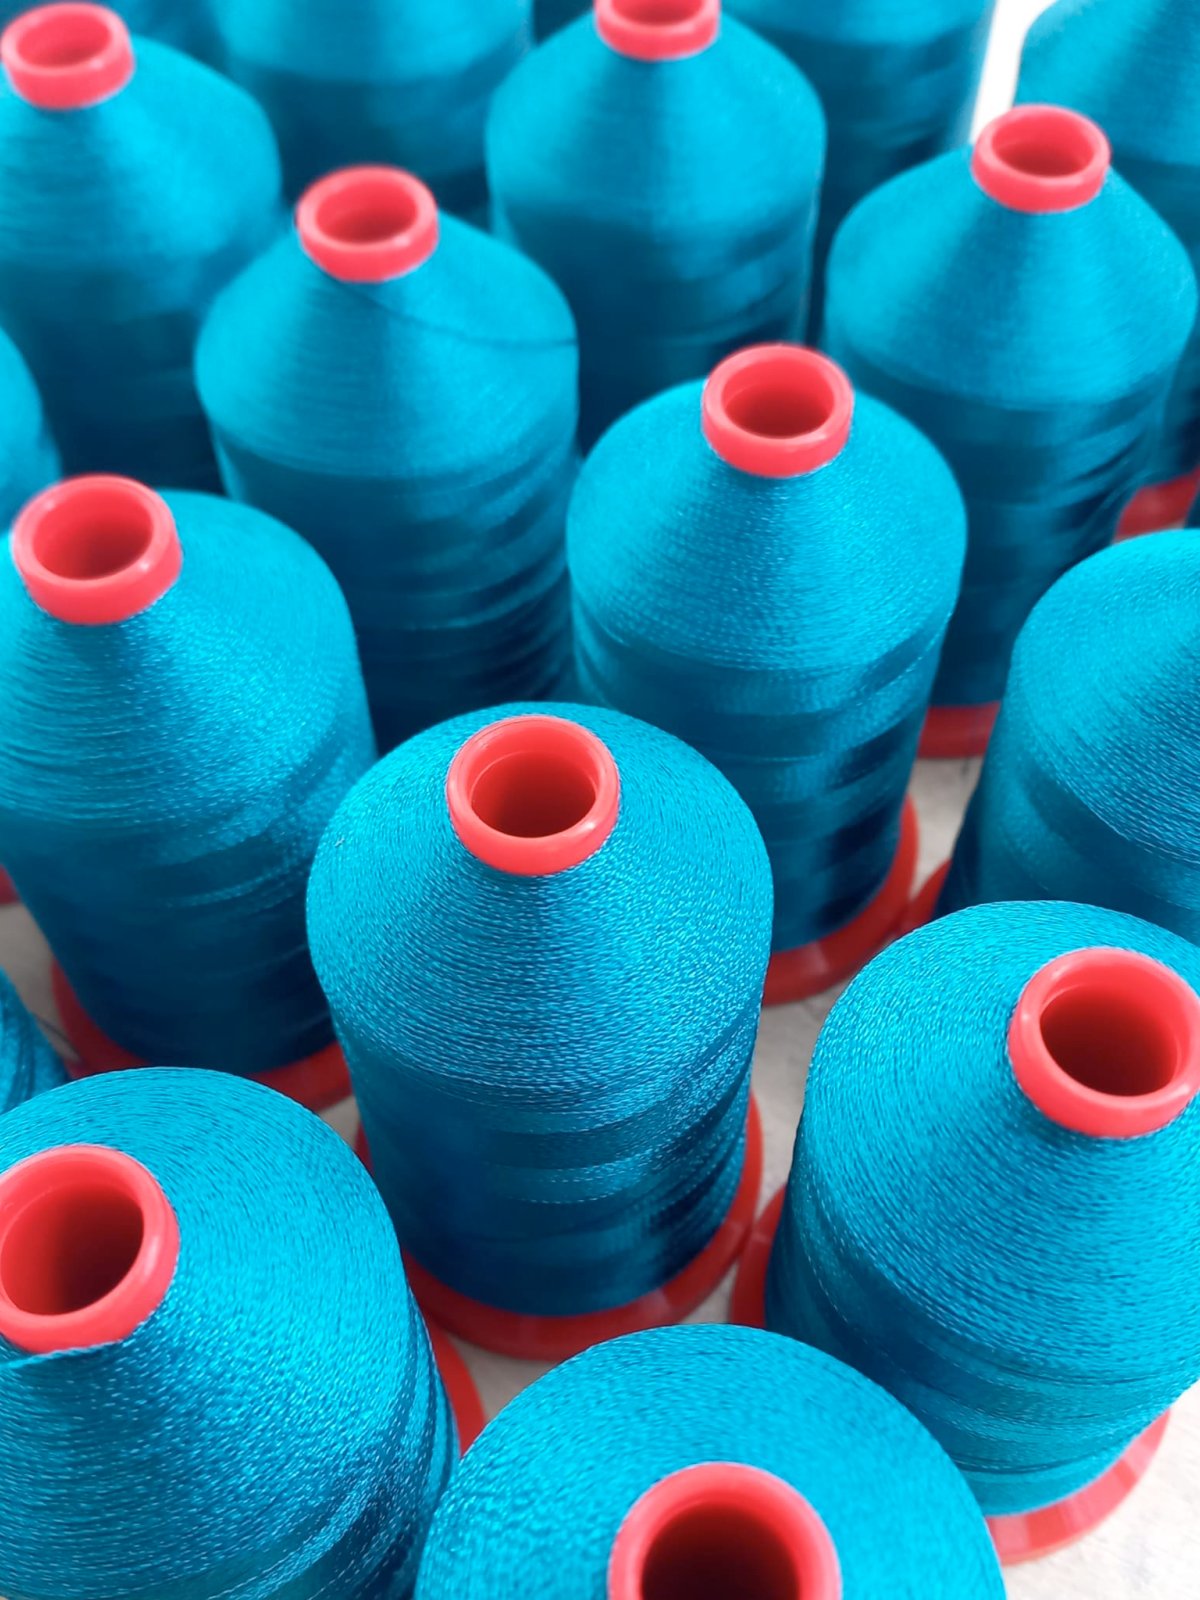 Certified eco-sustainability: the future of yarn and embroidery starts here